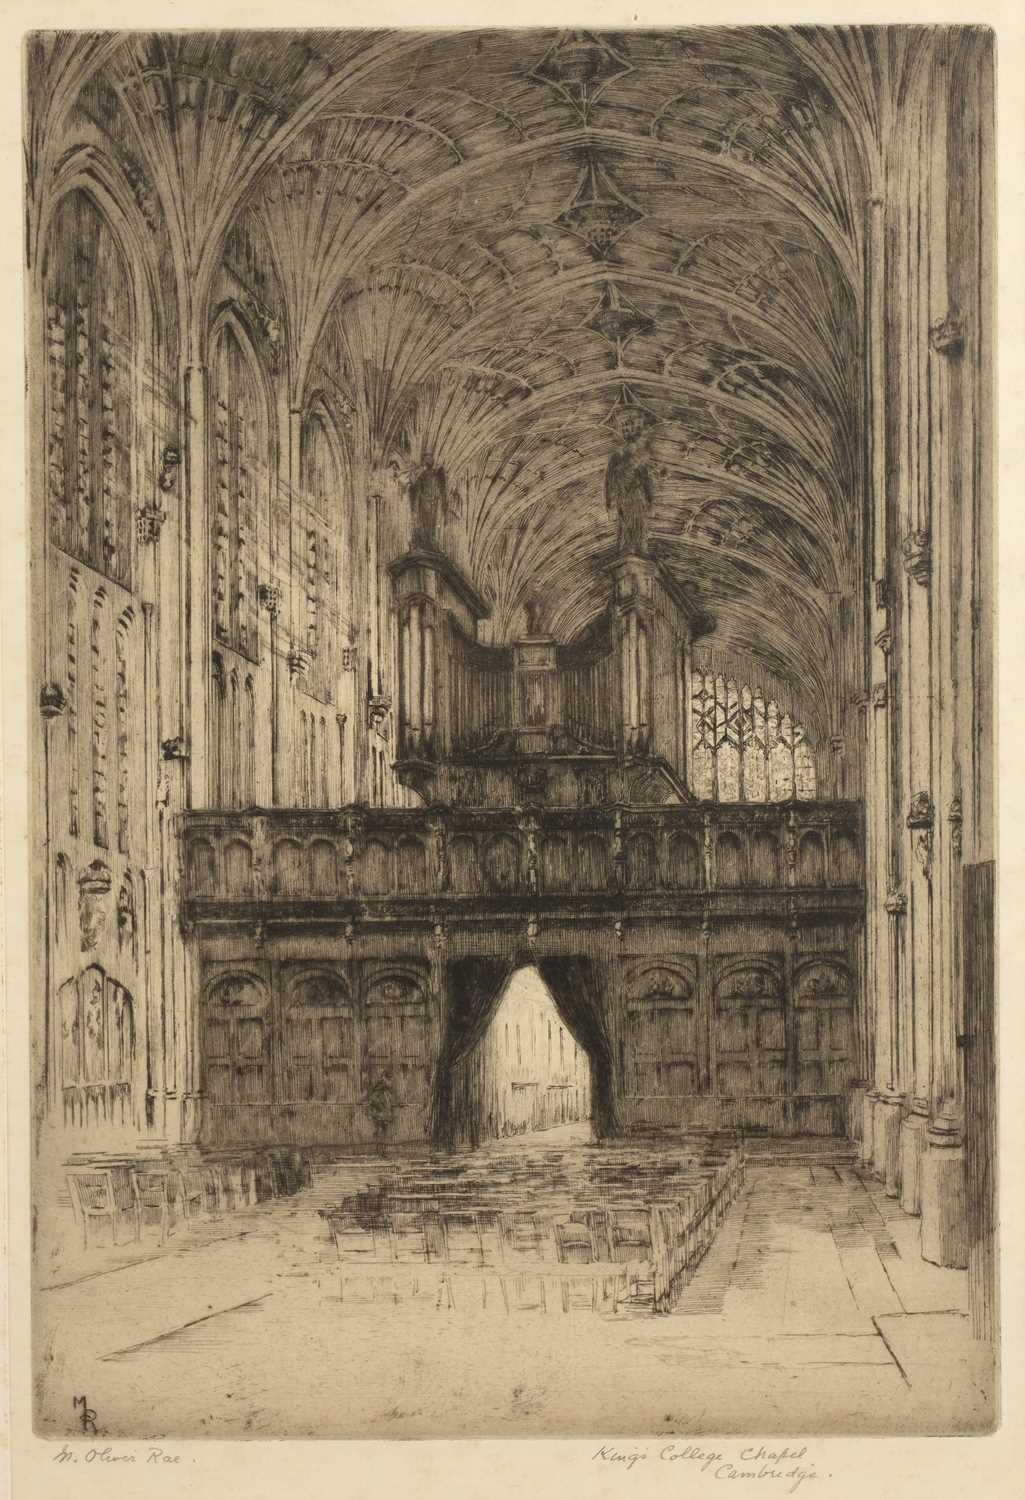 M Oliver Rae 'Kings College Chapel, Cambridge', etching, pencil signed in the margin and titled, - Image 7 of 9